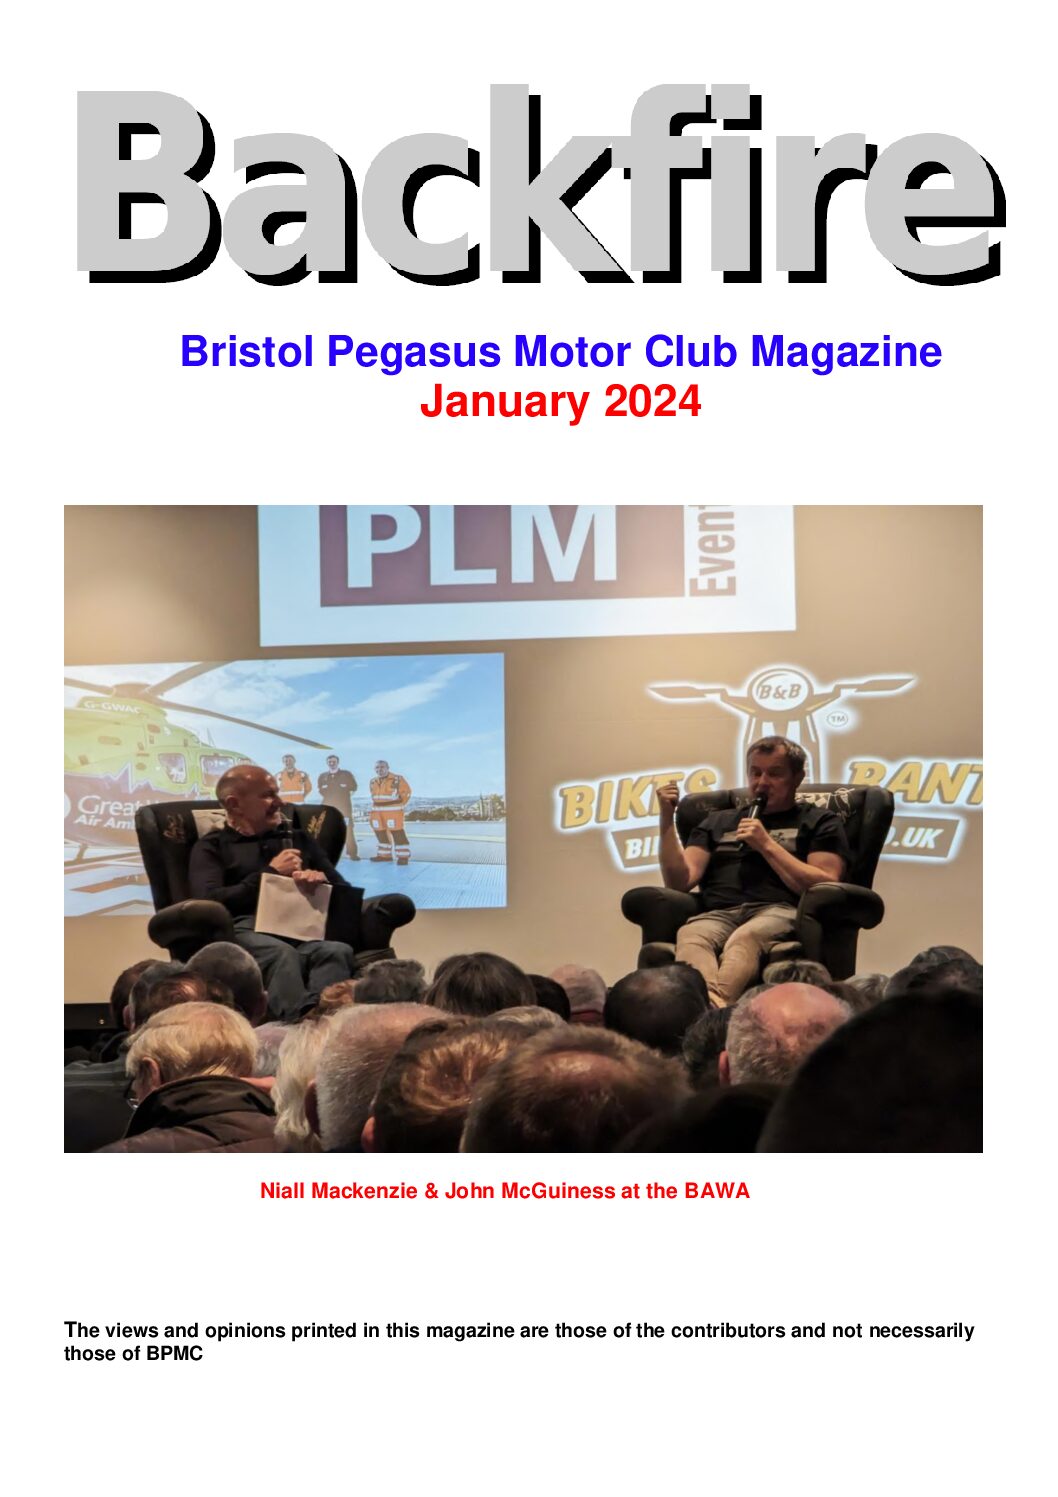 Front cover of January 2024 Issue